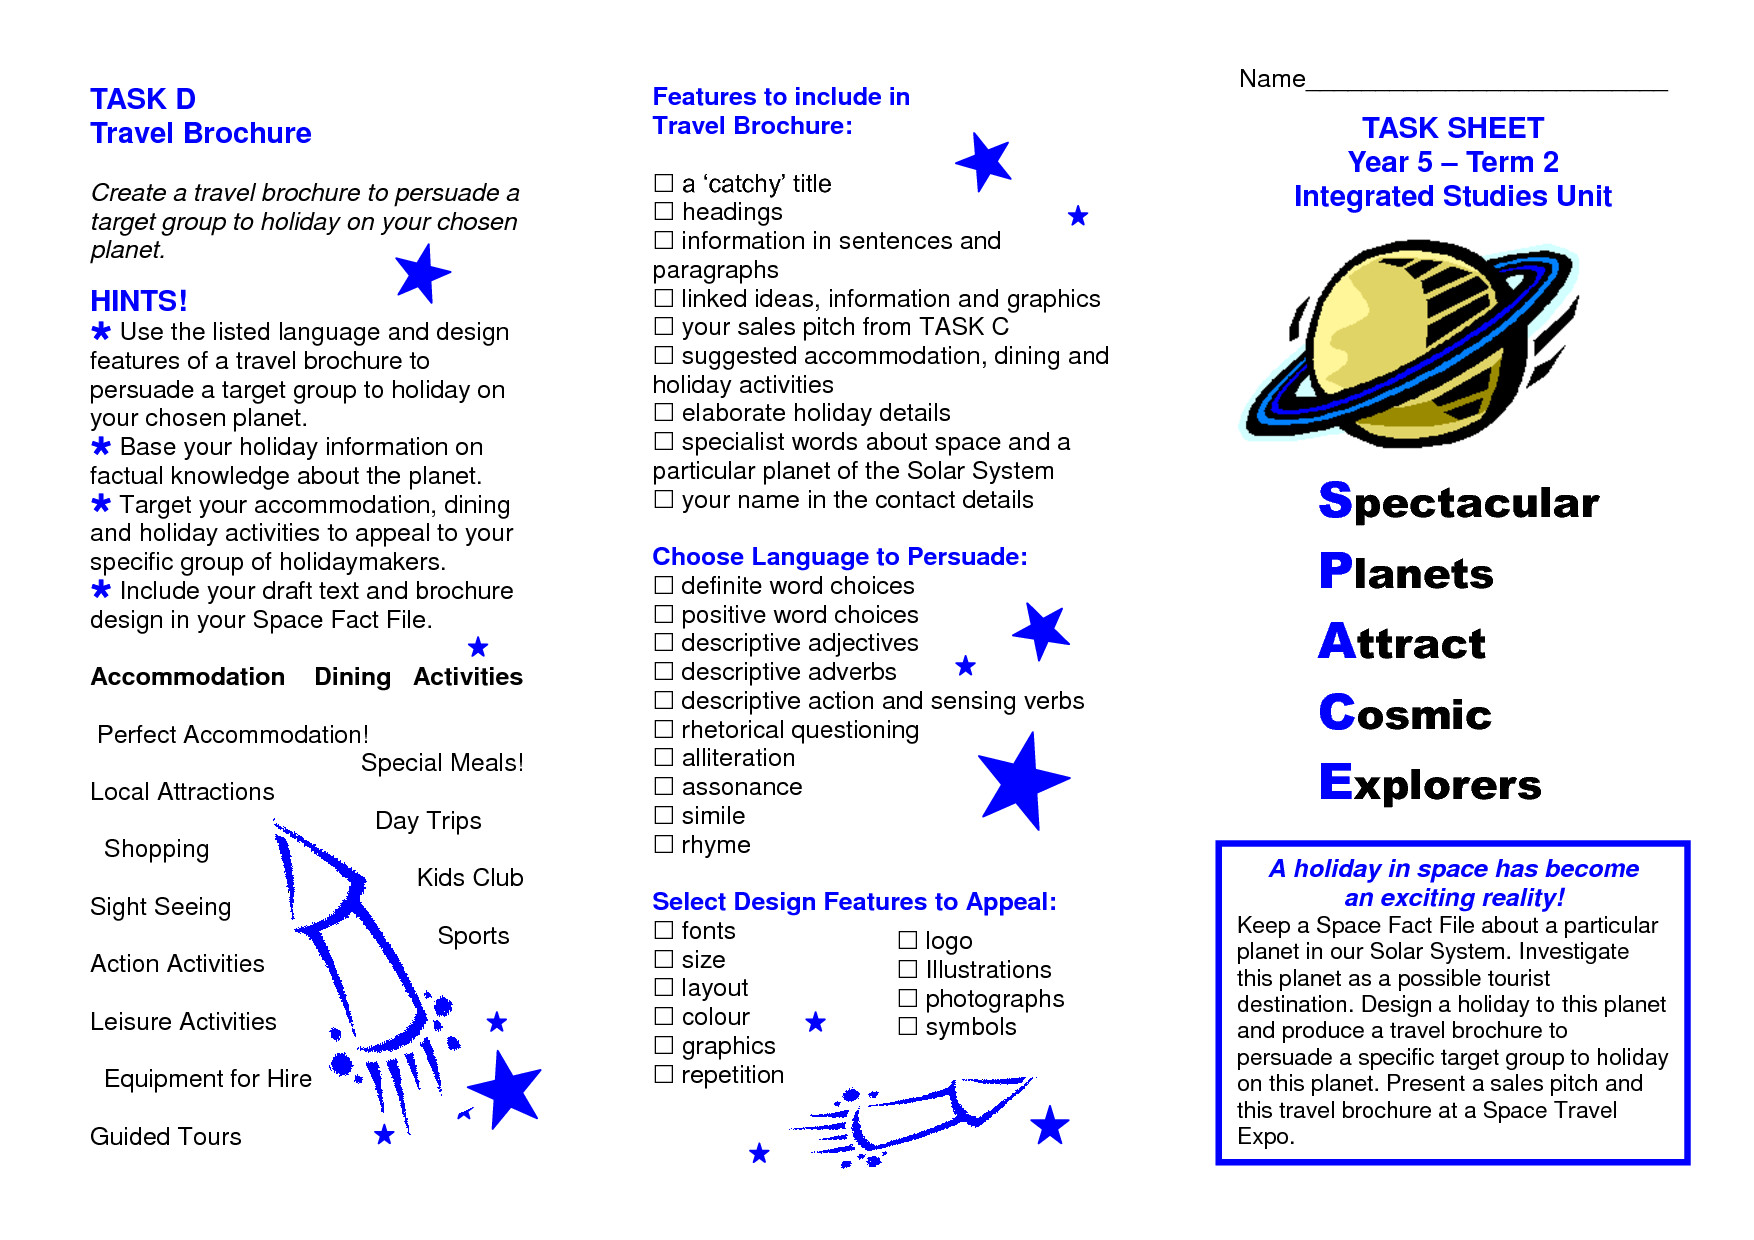 Planet Travel Brochure Examples